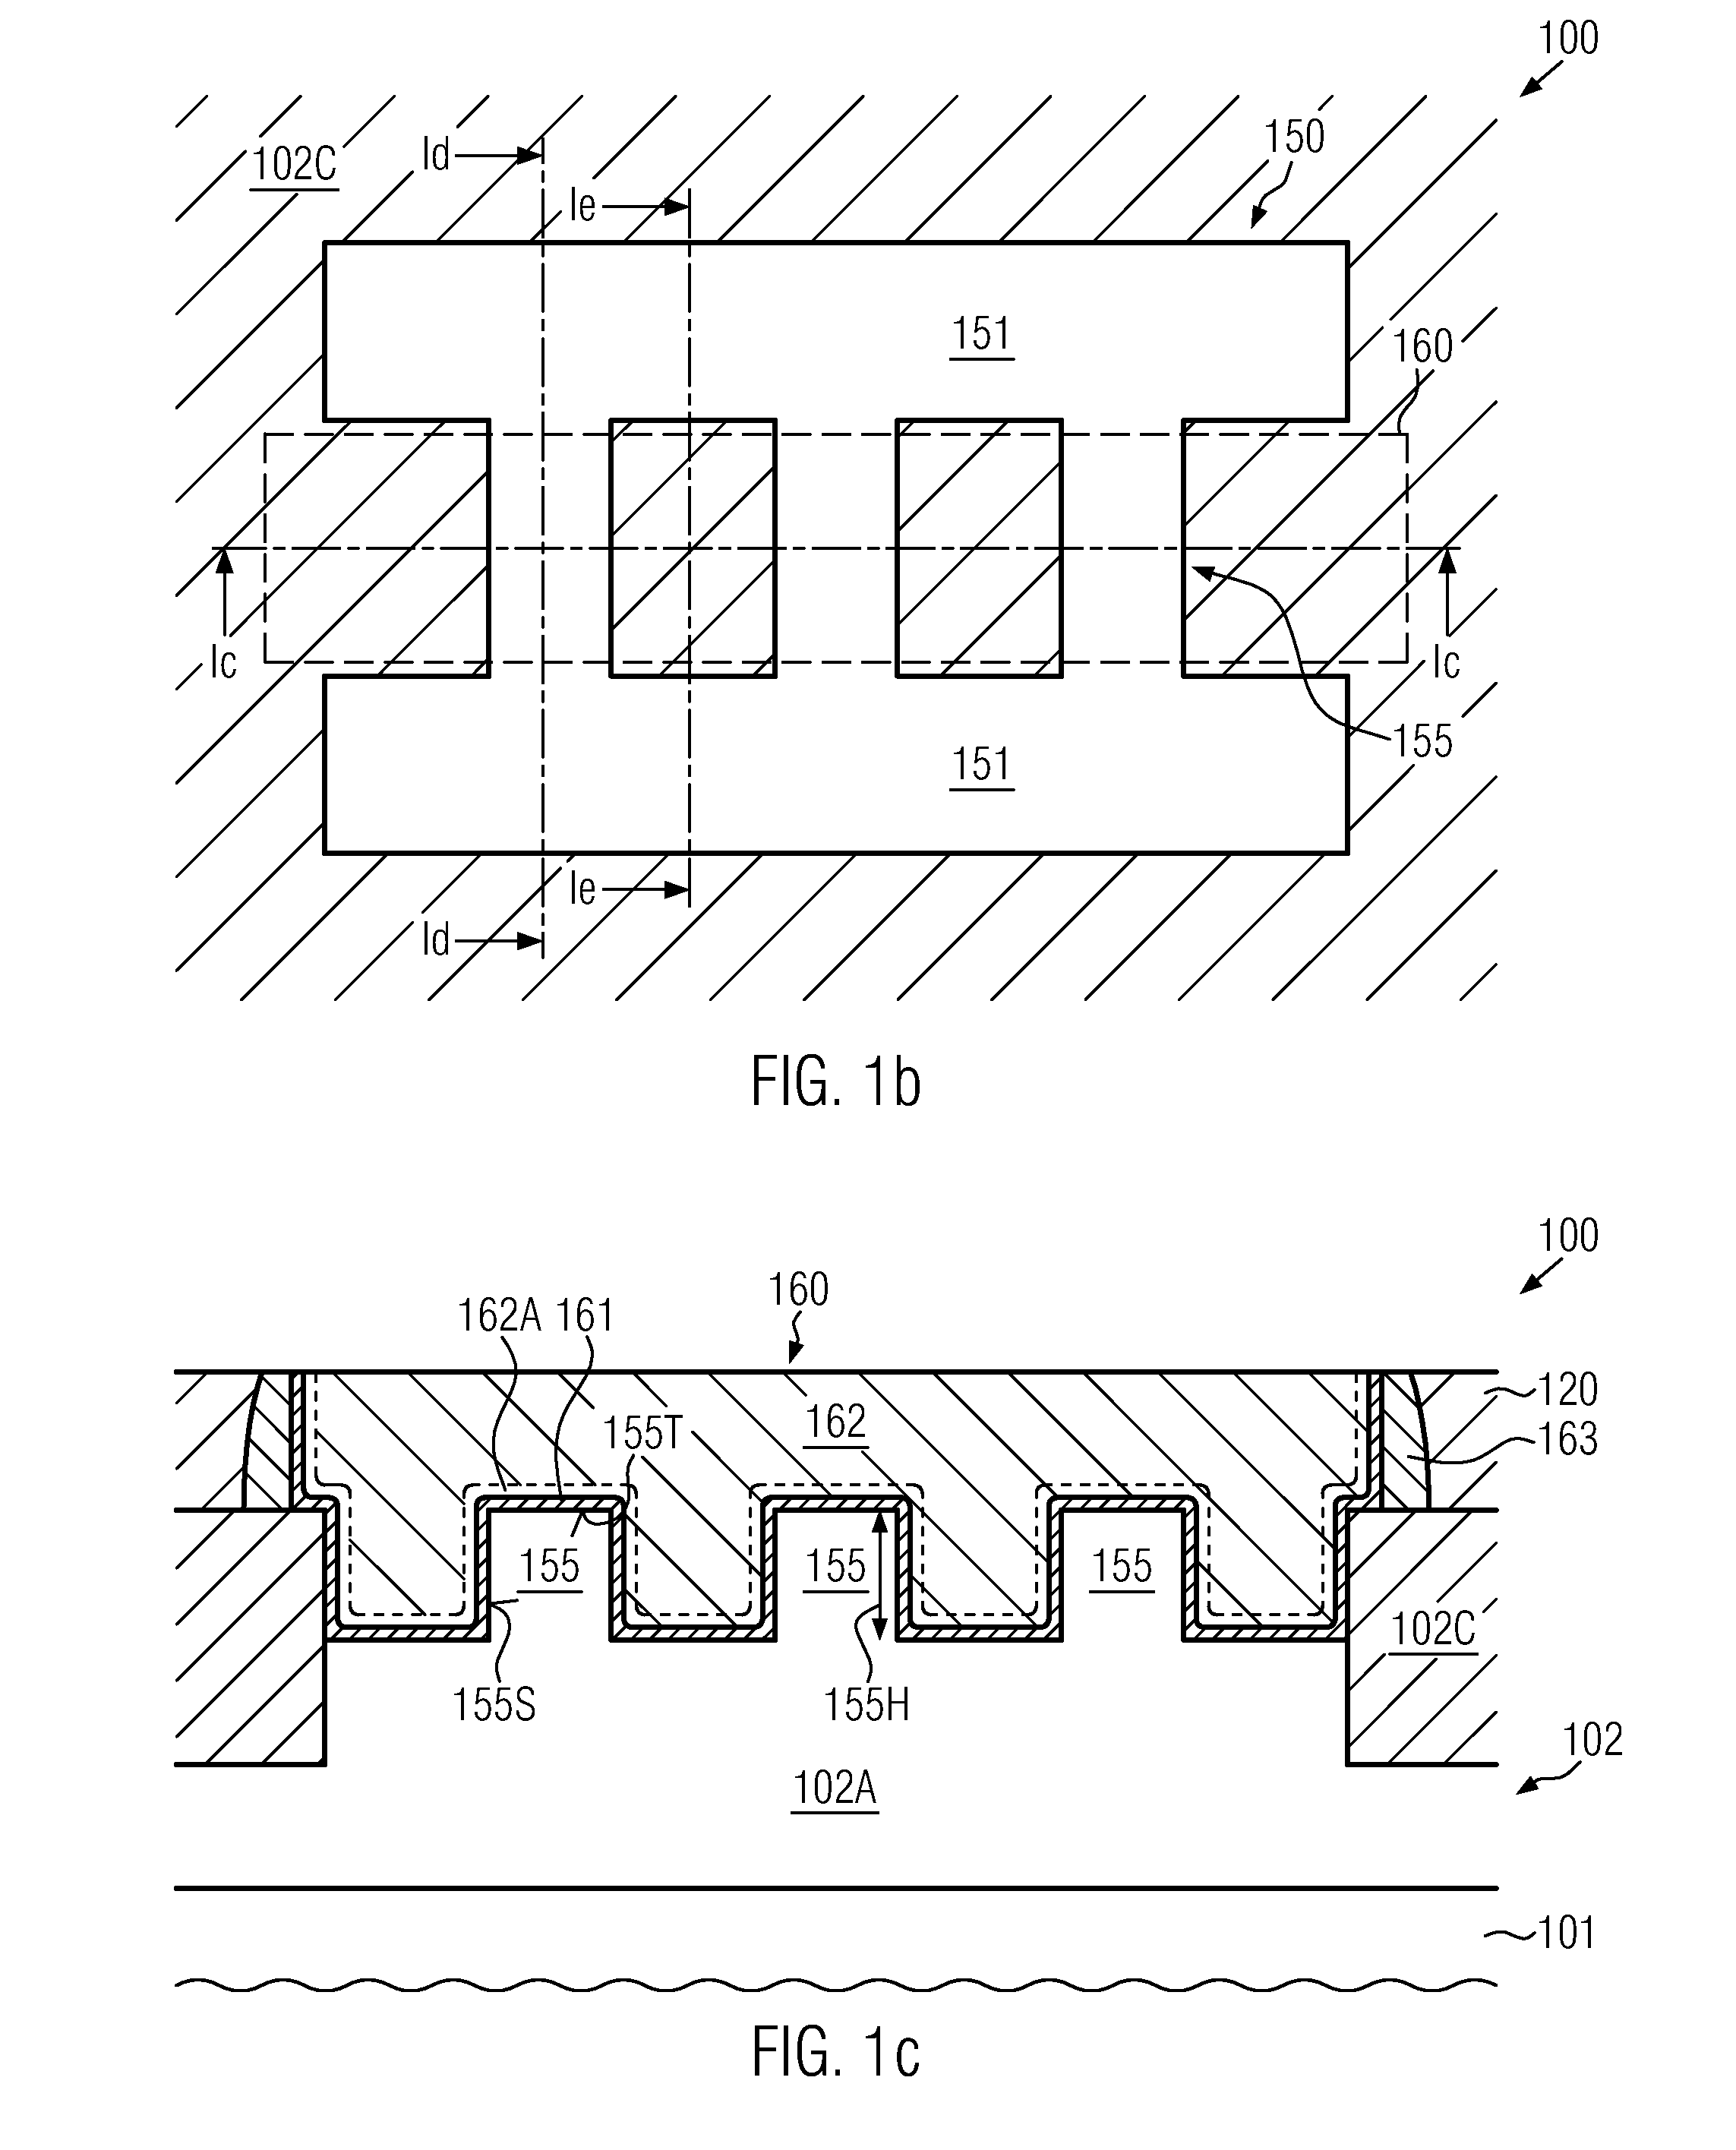 Self-Aligned Fin Transistor Formed on a Bulk Substrate by Late Fin Etch